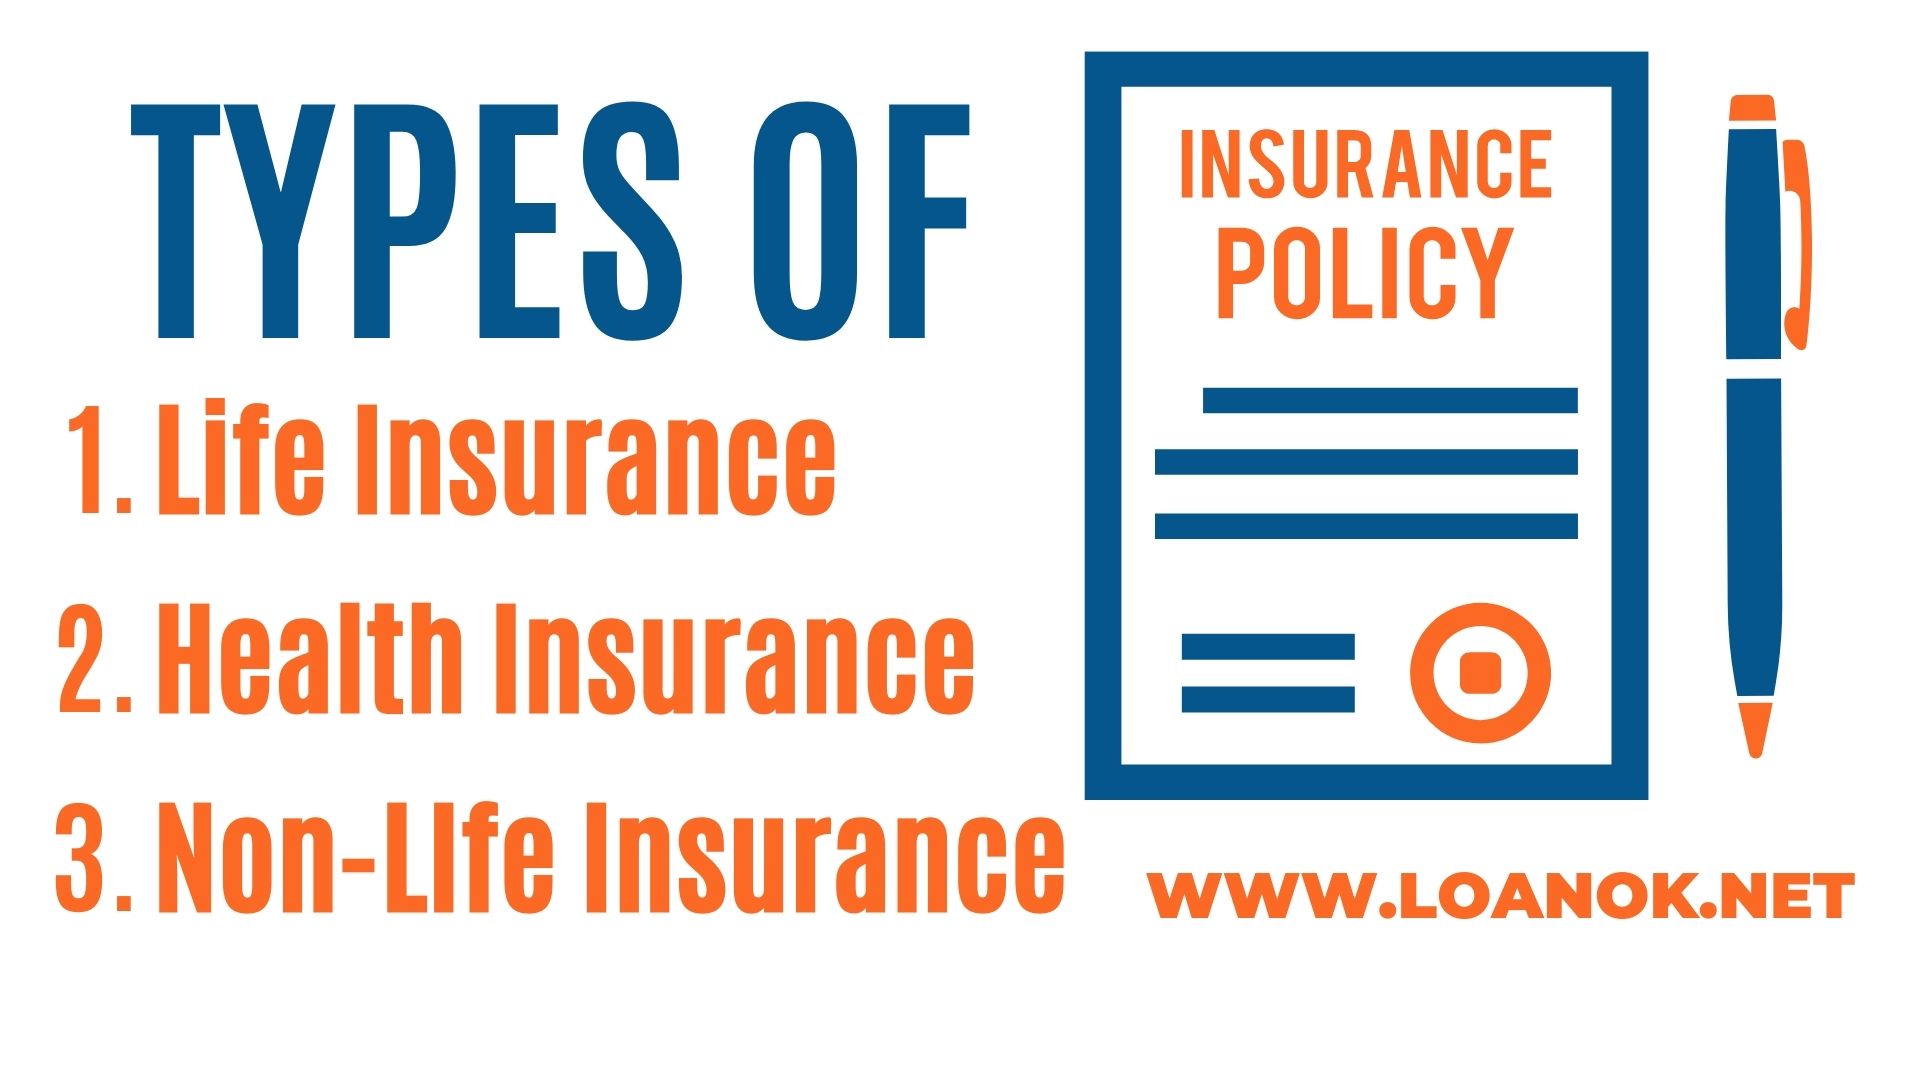 TYPES OF INSURANCE POLICY